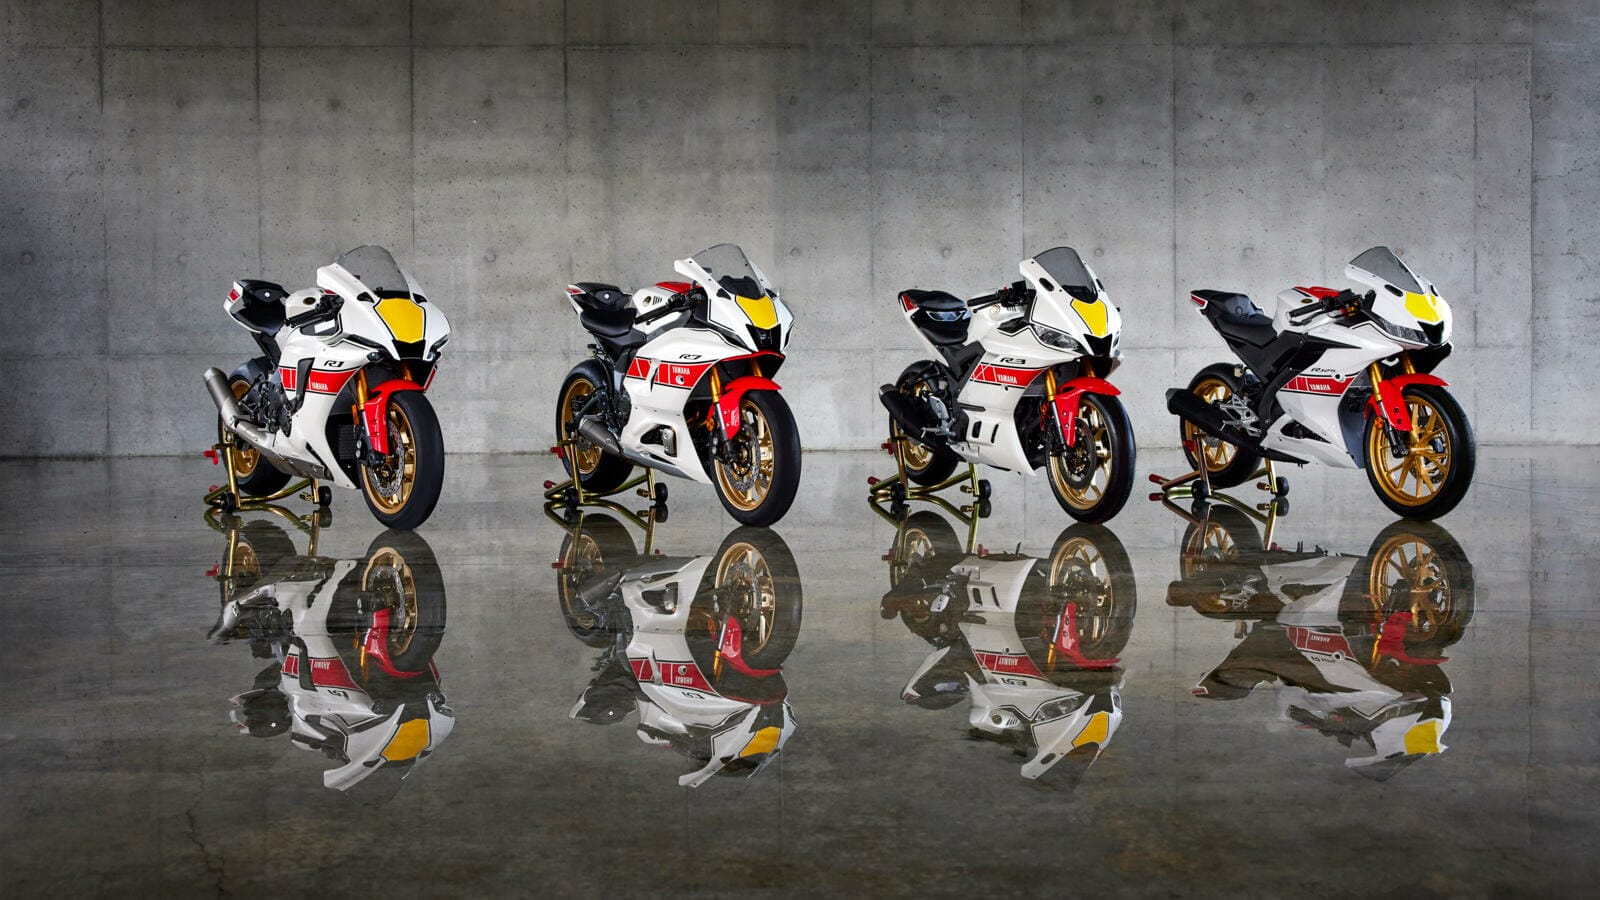 Yamaha celebrates with special models
- also in the MOTORCYCLES.NEWS APP